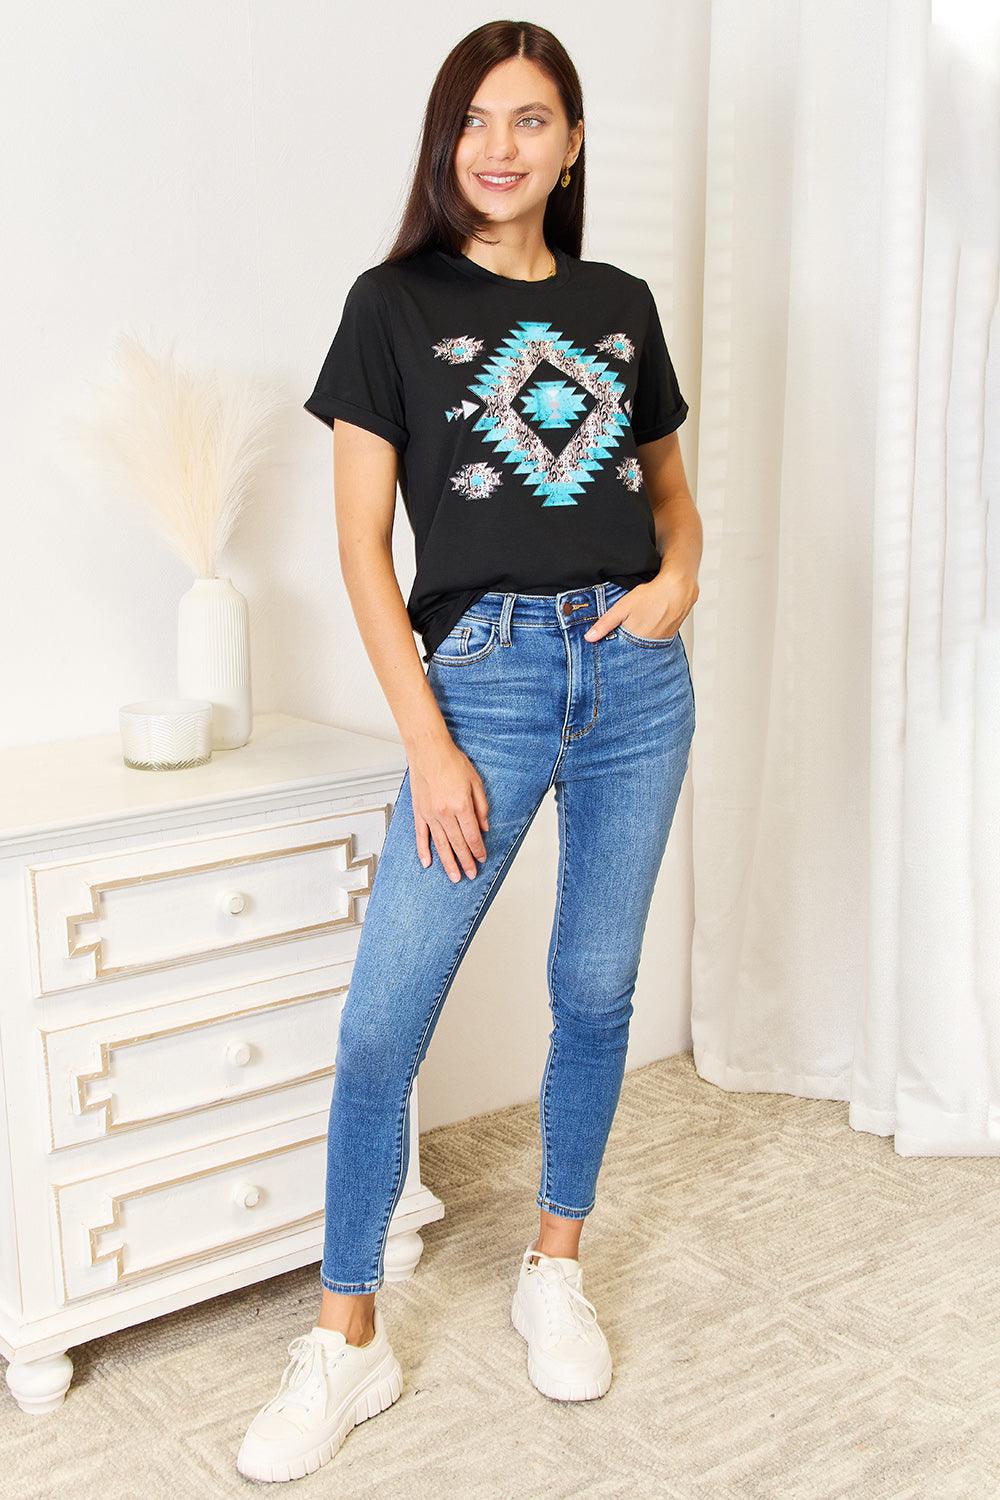 Simply Love Graphic Short Sleeve T-Shirt - Anchored Feather Boutique